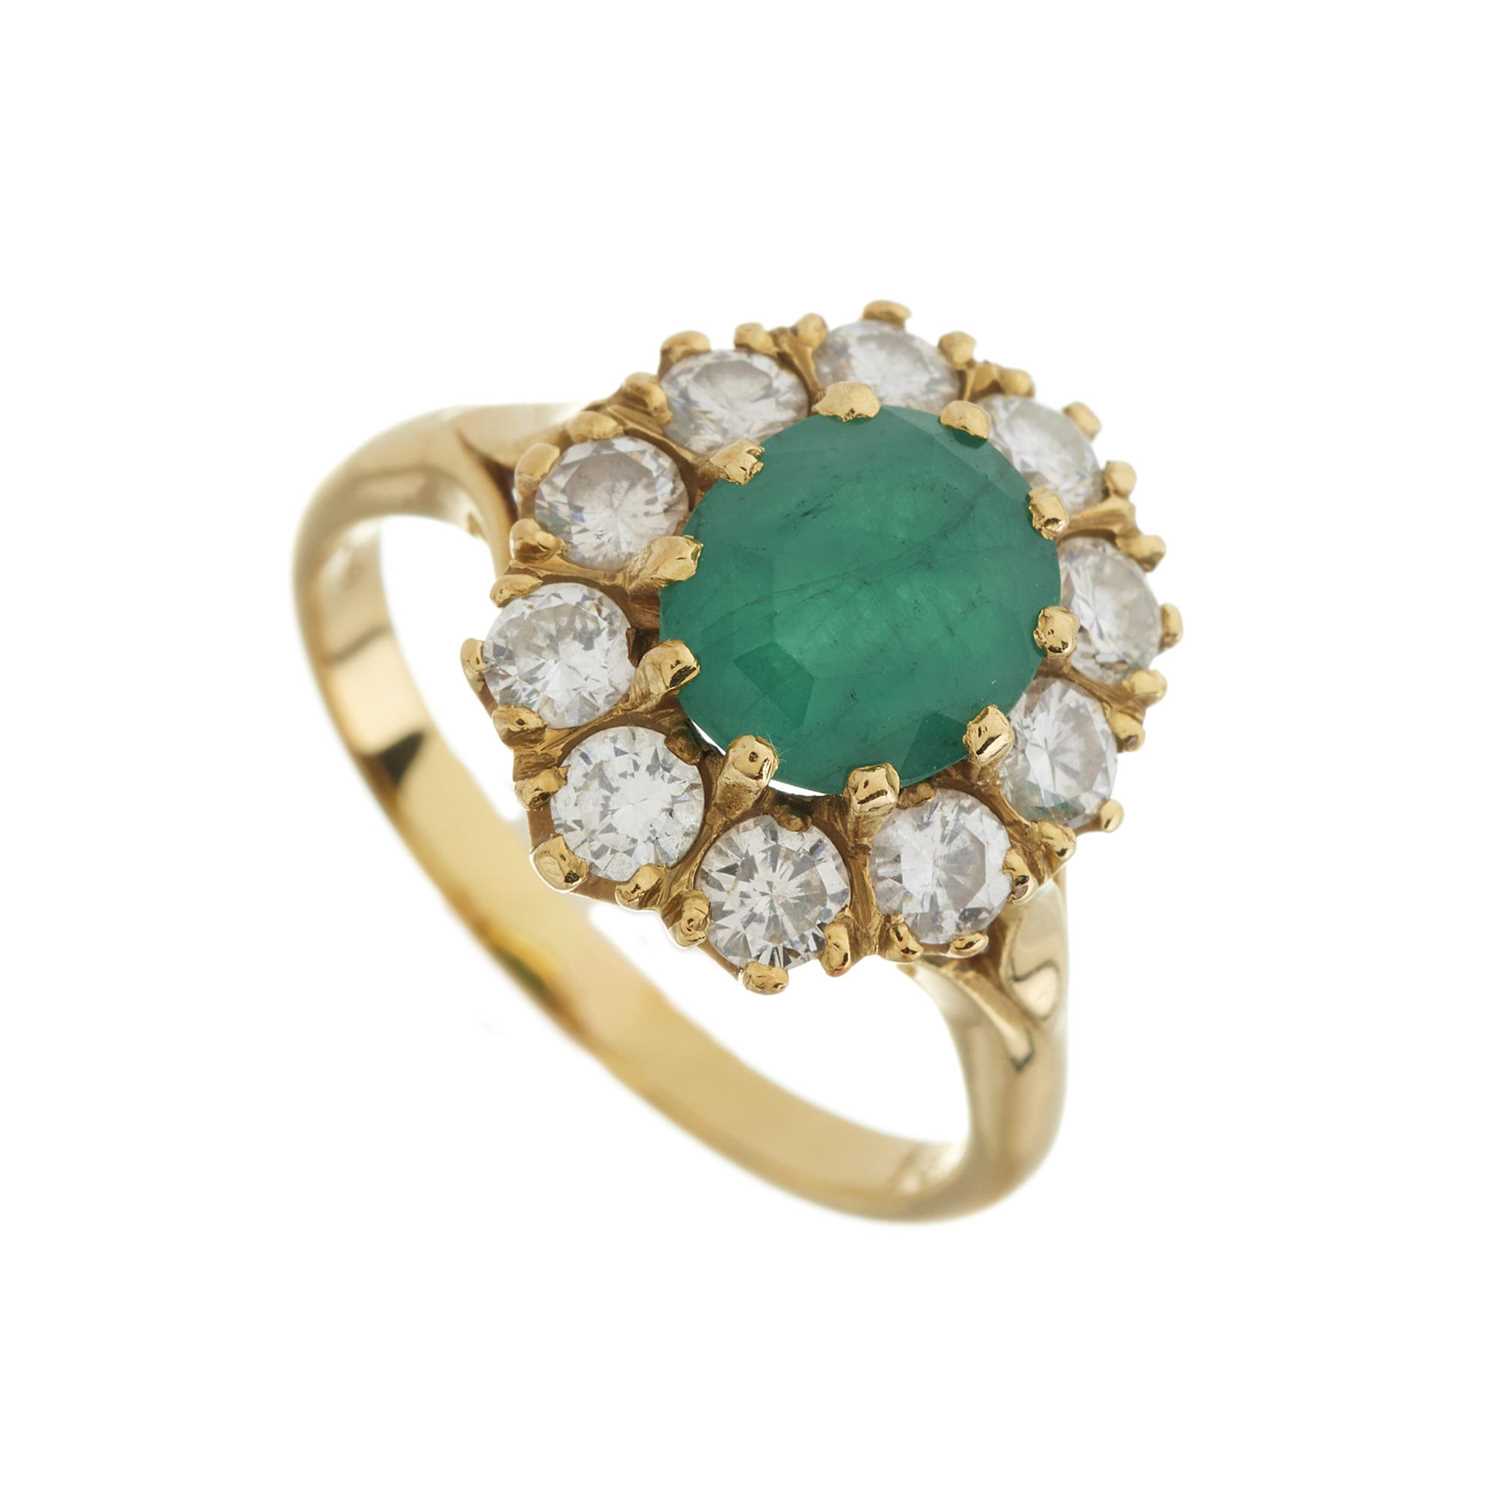 An 18ct gold emerald and diamond cluster ring - Image 3 of 3